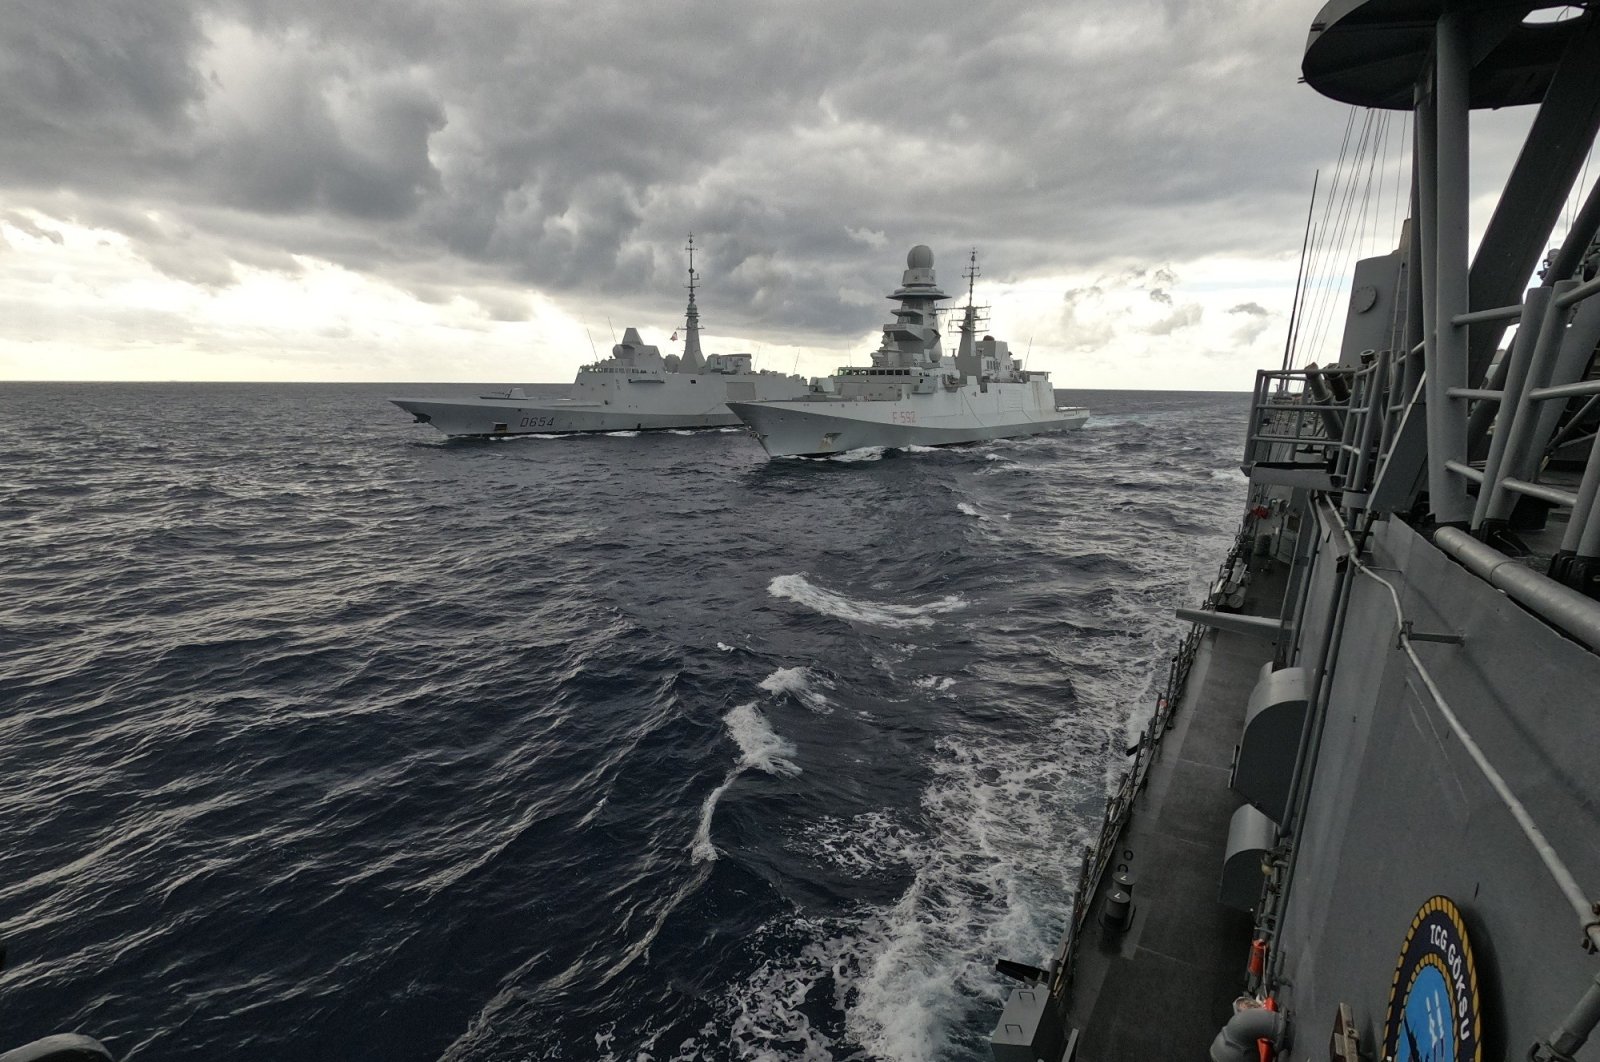 TCG Göksu and TCG Salihreis attend training with NATO&#039;s ITS Margottini in the Eastern Mediterranean in this photo released by Turkey&#039;s Defense Ministry, Jan. 12, 2022. (Defense Ministry handout)